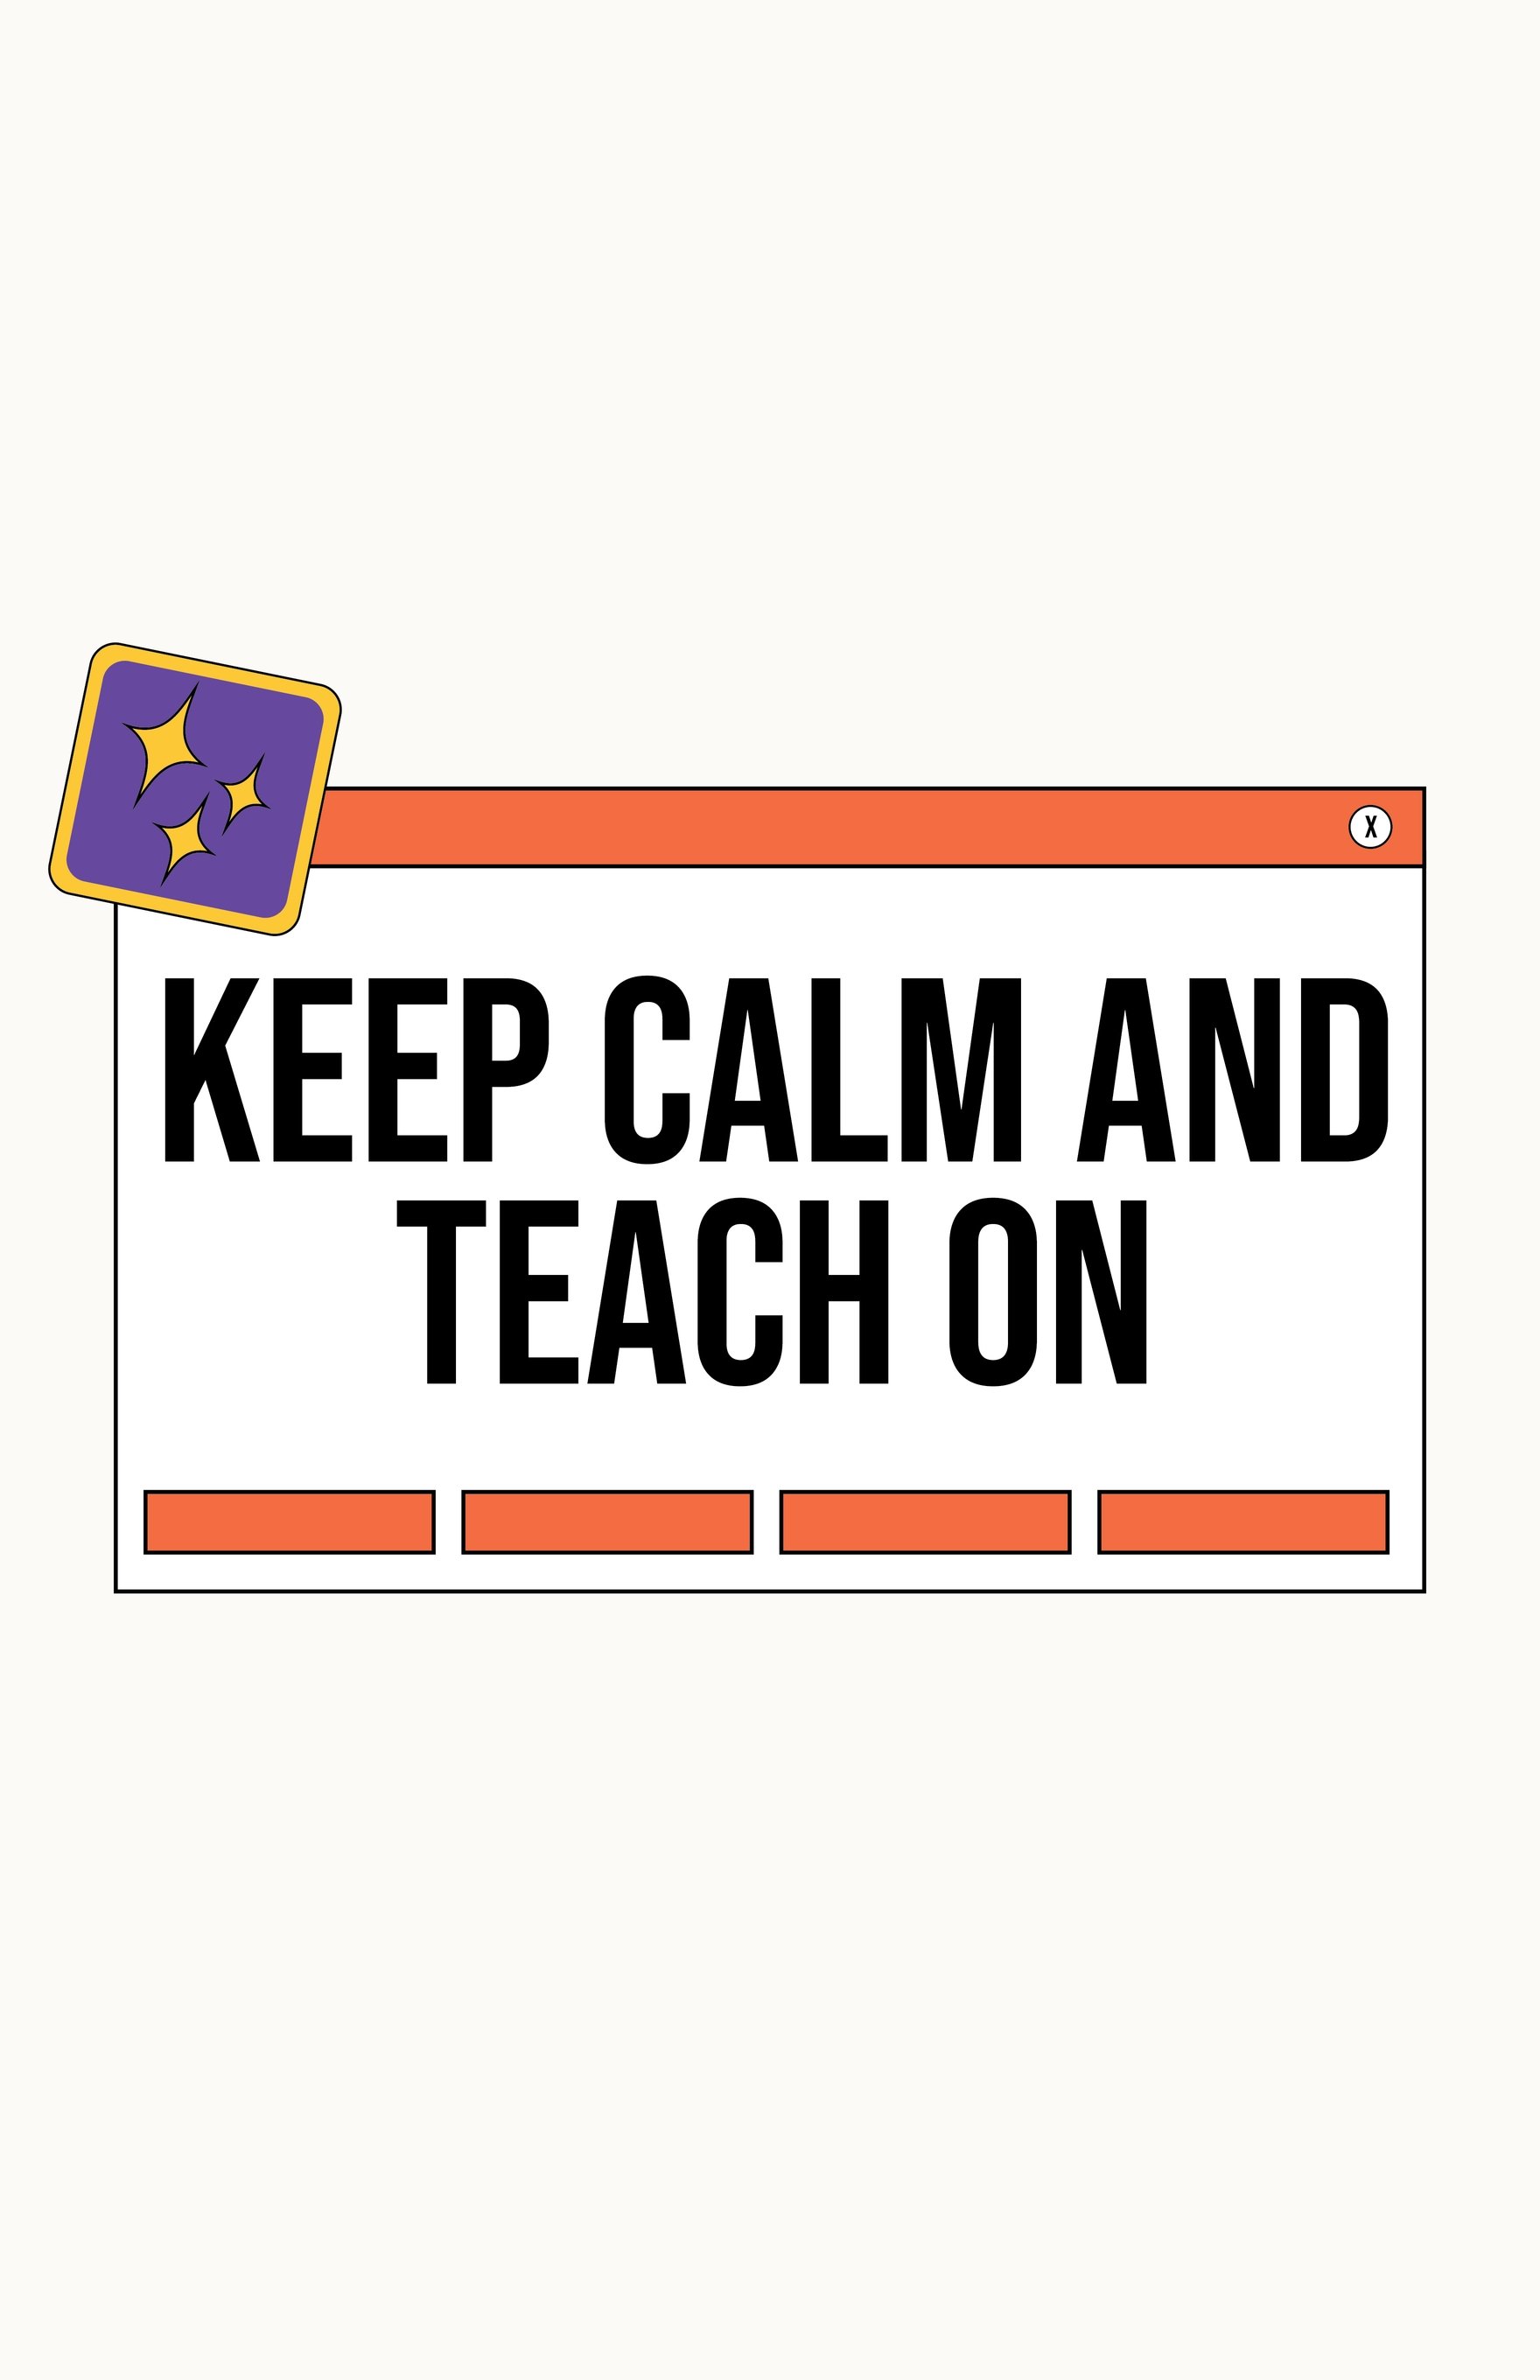 Free Keep Calm And Teach On Poster in Word, Google Docs, Illustrator, PSD, Apple Pages, Publisher, EPS, JPG, PNG